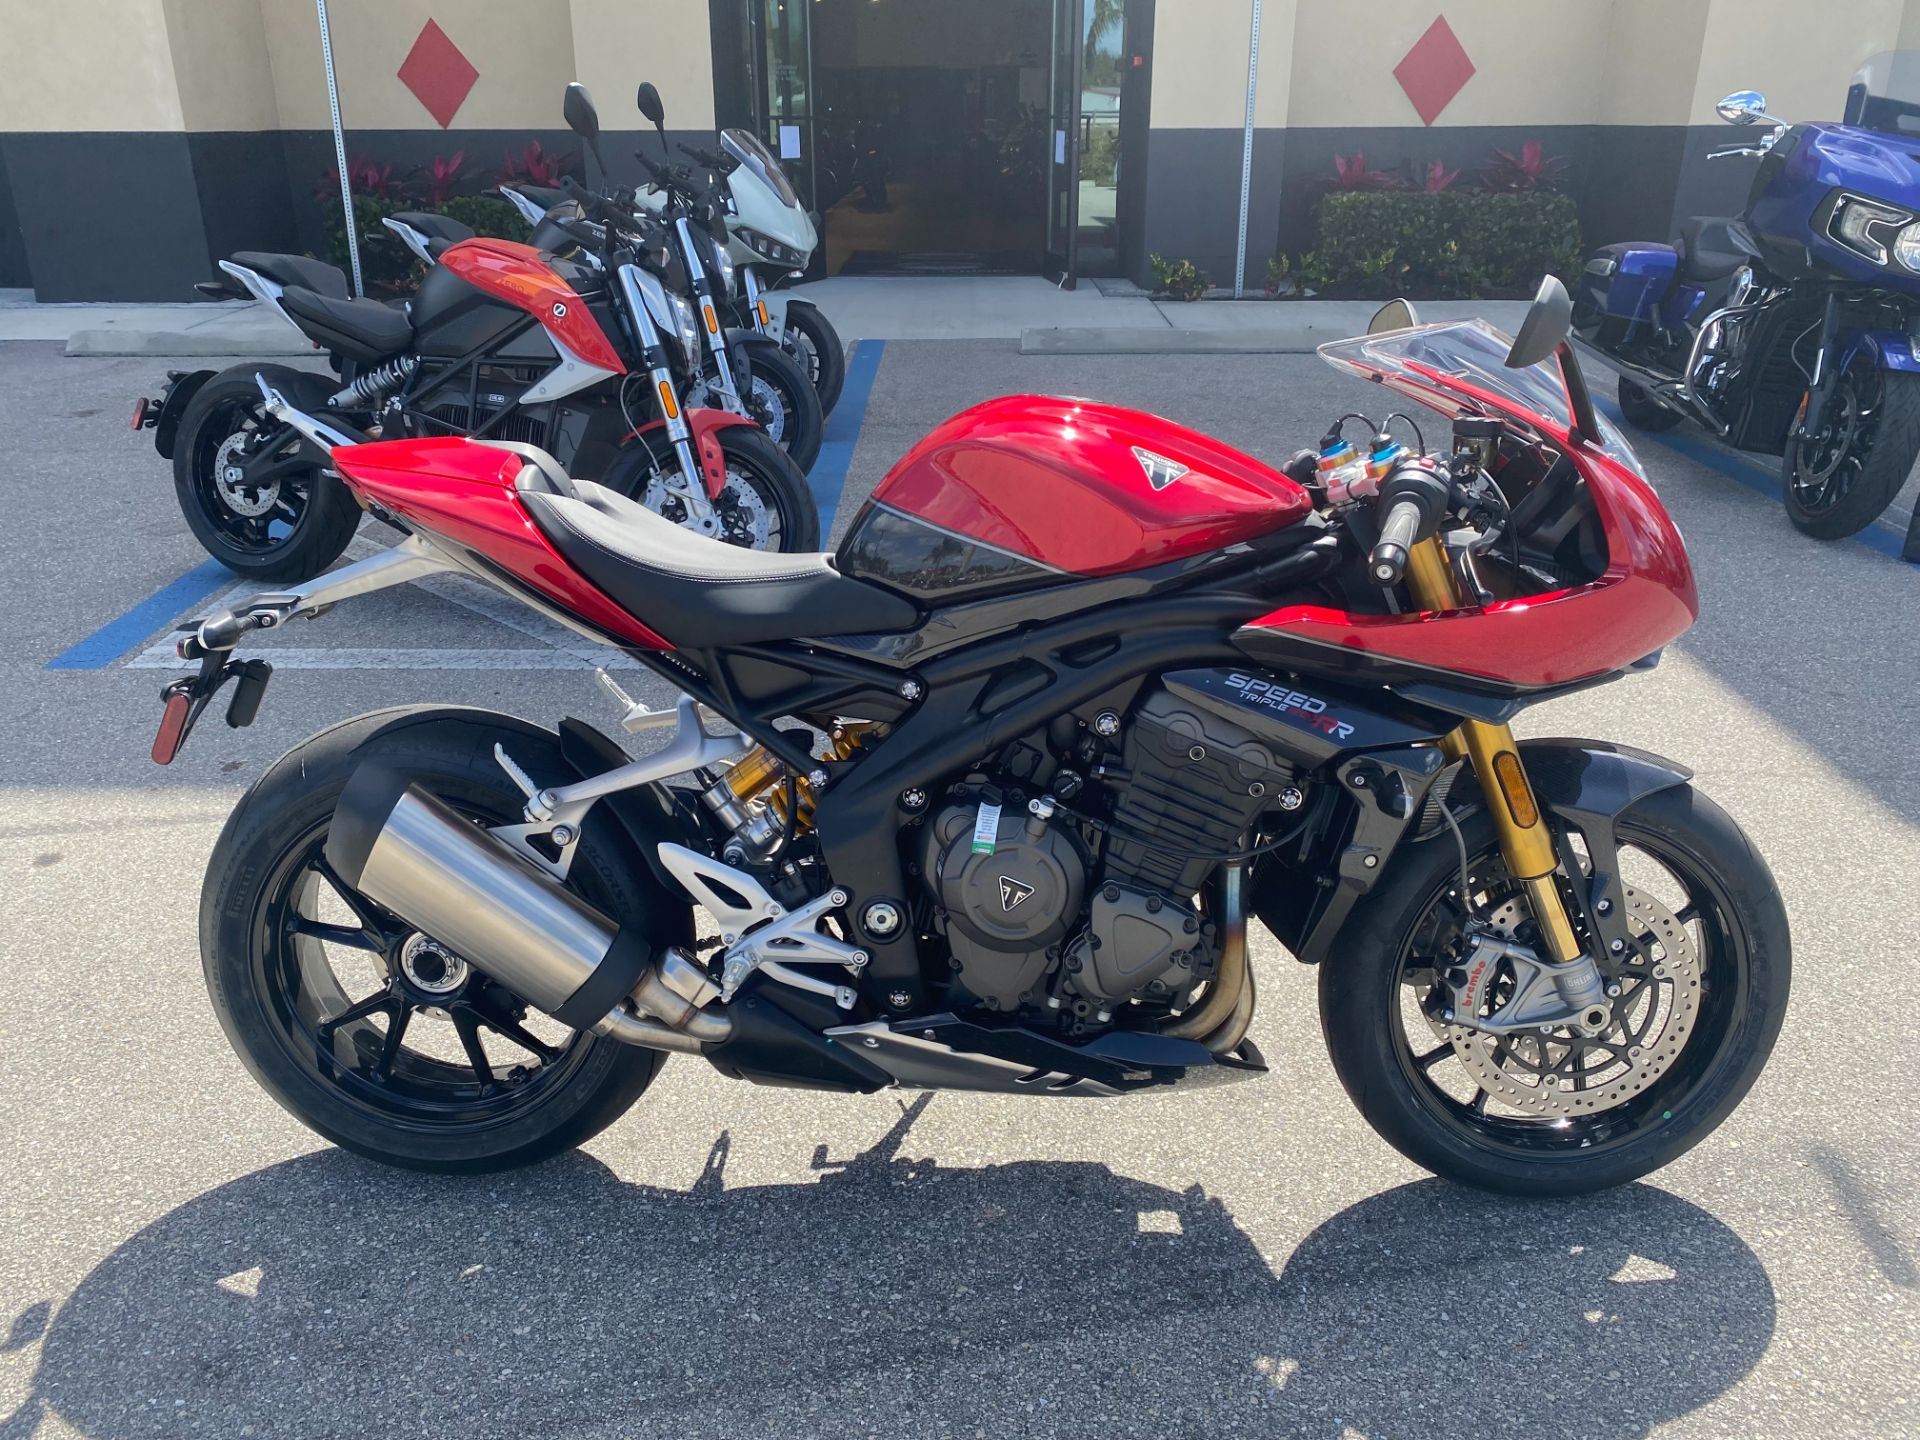 2022 Triumph Speed Triple 1200 RR in Fort Myers, Florida - Photo 2